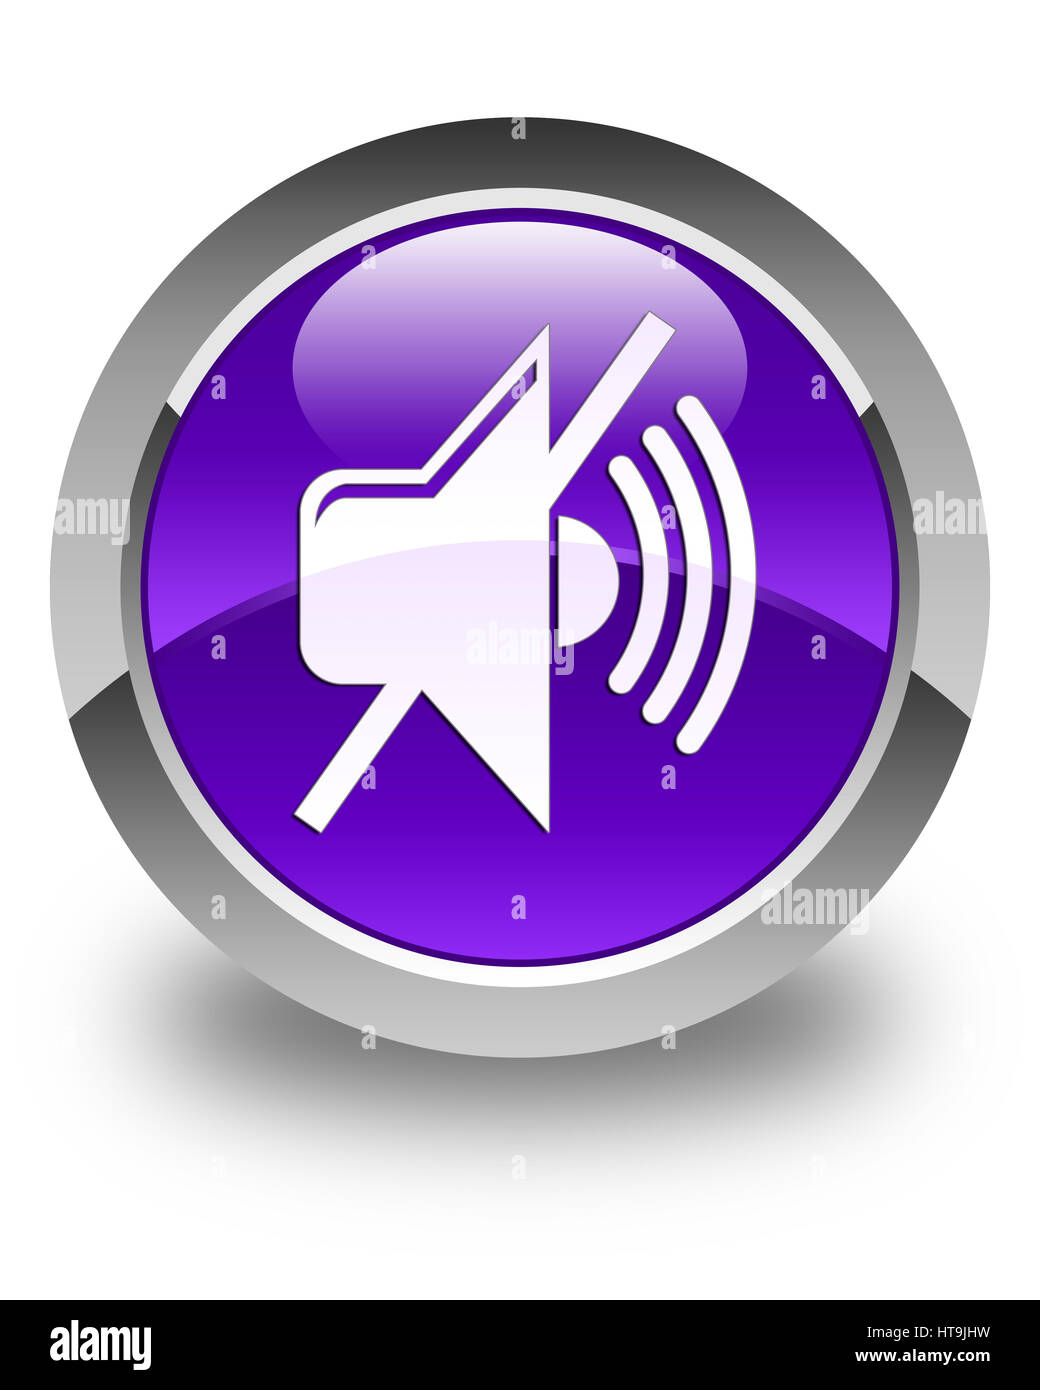 Mute volume icon isolated on glossy purple round button abstract illustration Stock Photo